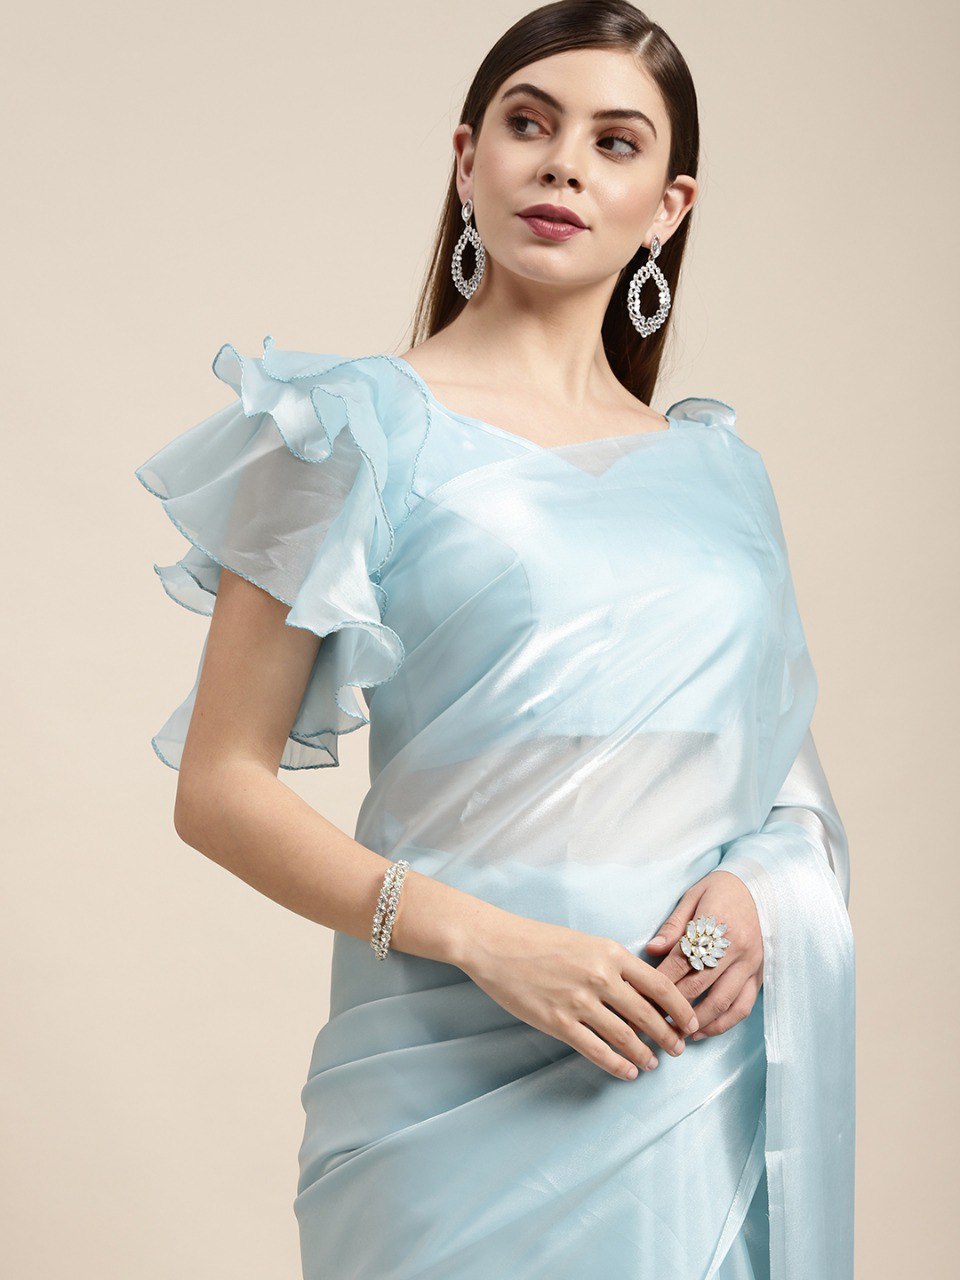 Buy Blue Color Latest Saree Collection Online in India